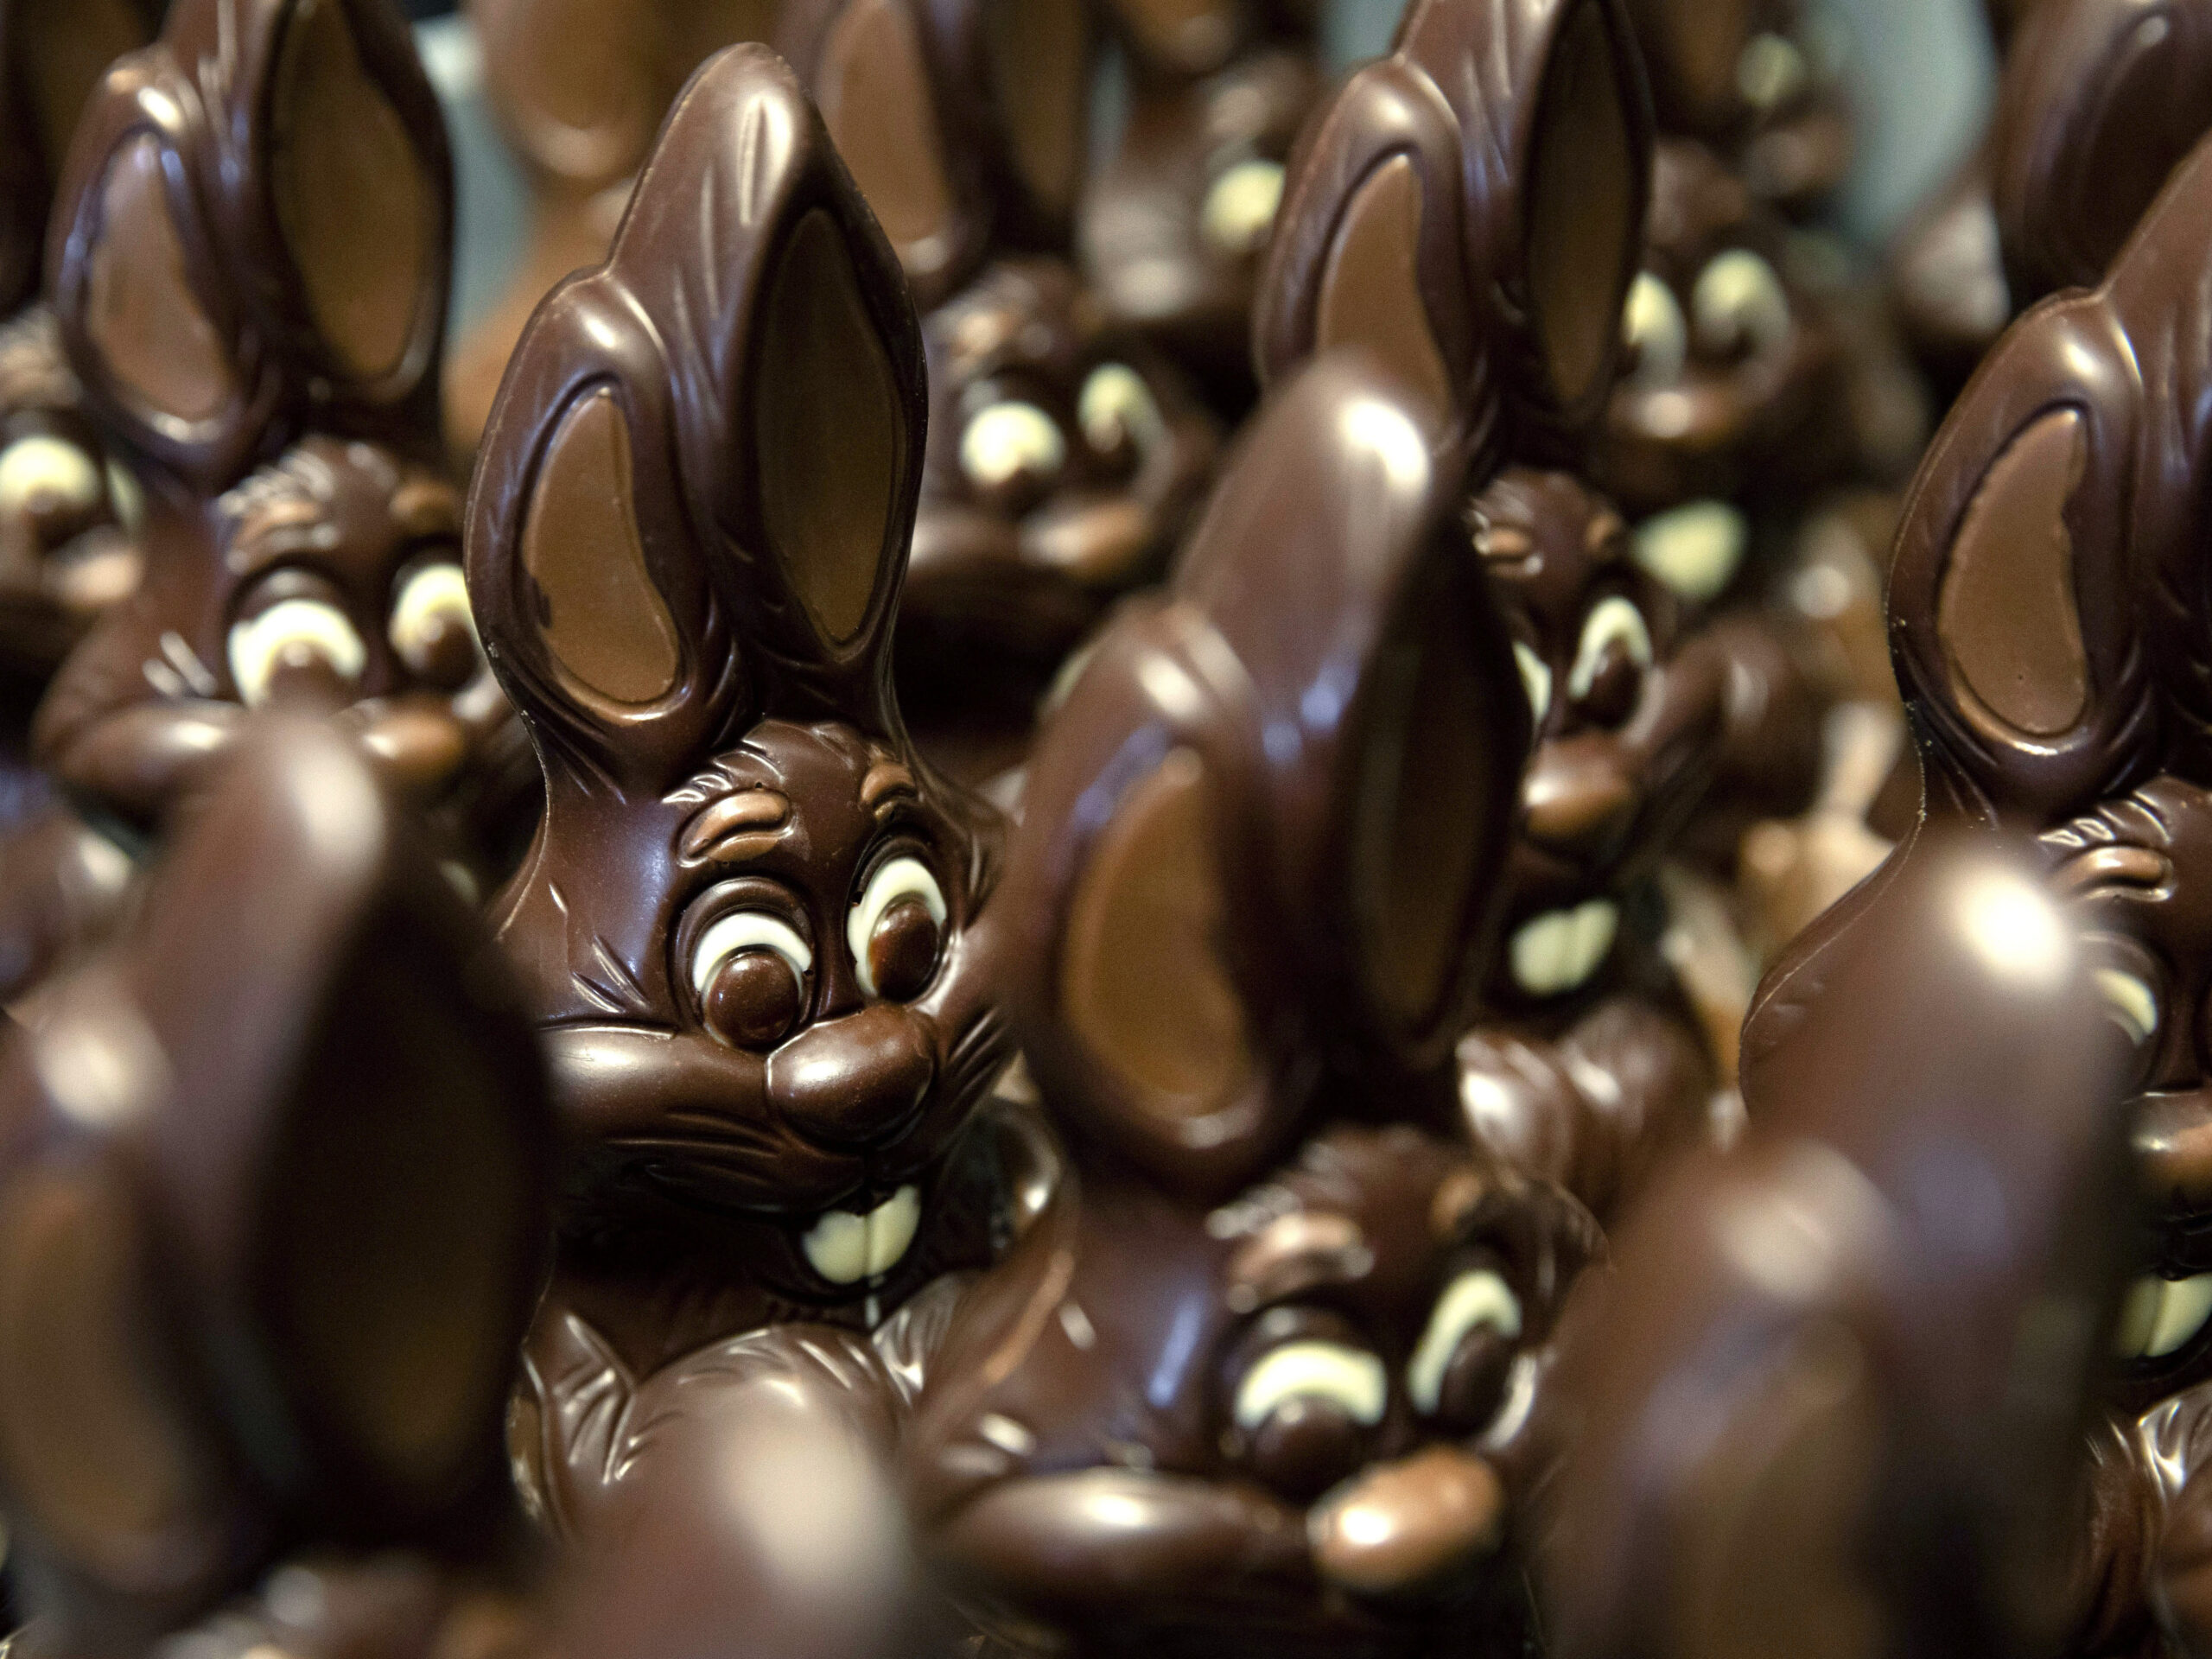 Pricier Easter bunnies and eggs. Half-dipped Kit Kats. What’s up with chocolate?